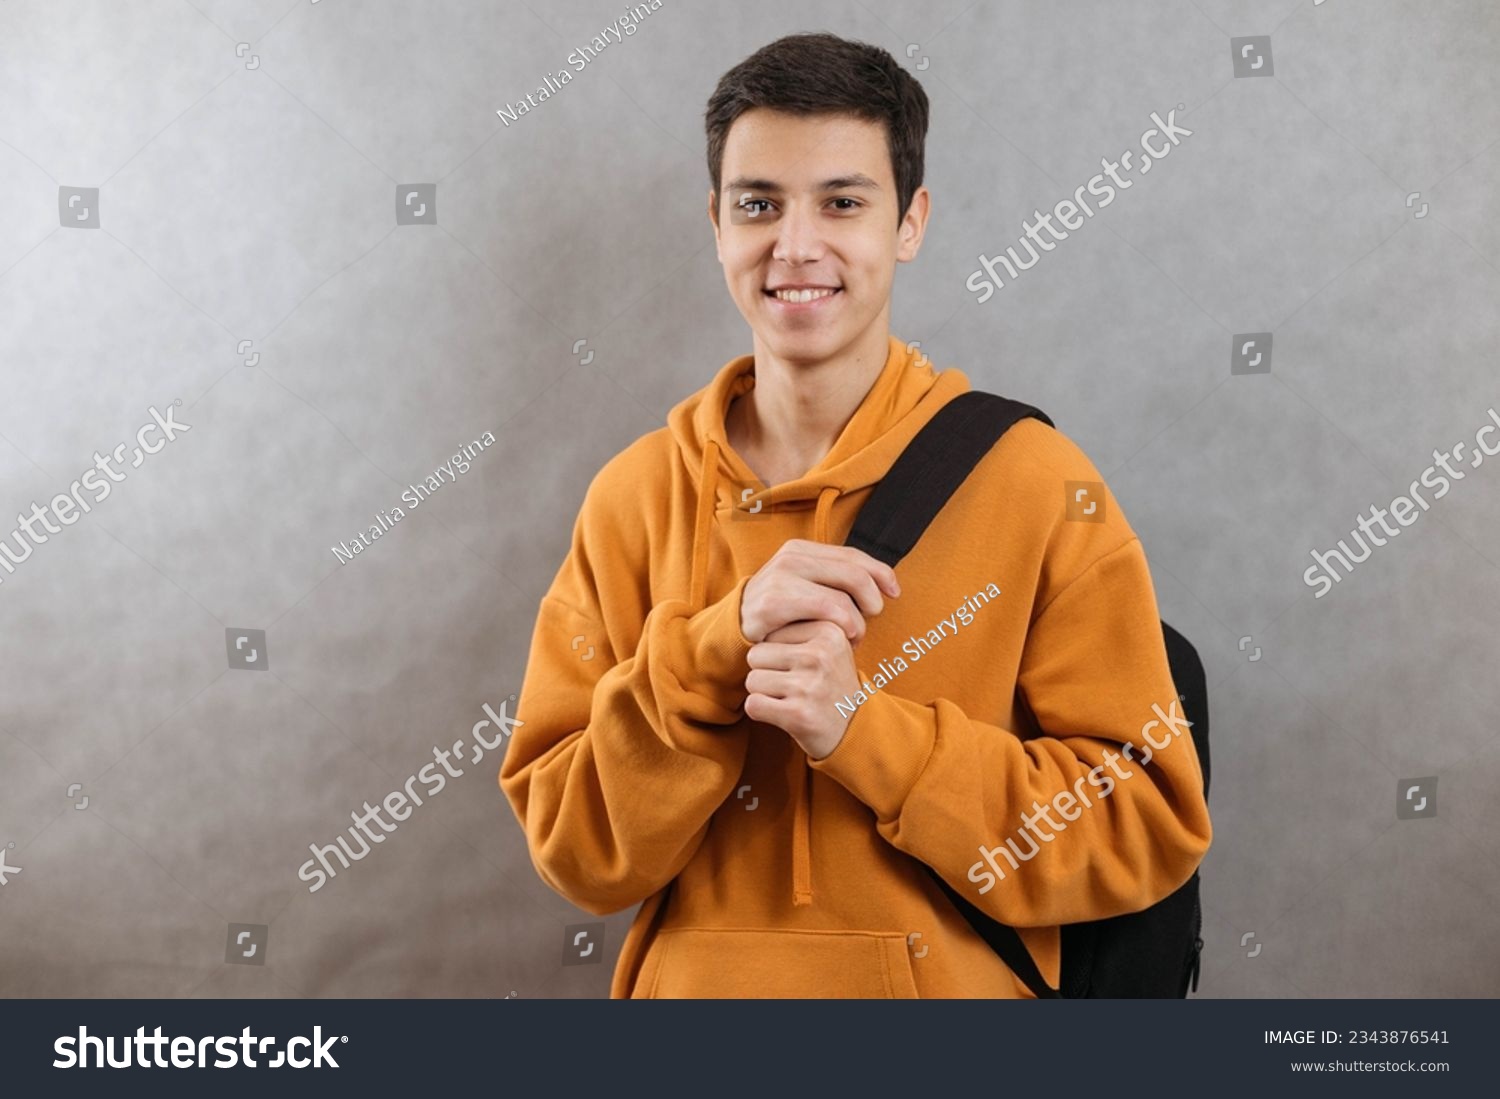 Portrait of a young student with a school bag. The teenager smiles and looks at the camera. A happy teenage boy on a grey background #2343876541